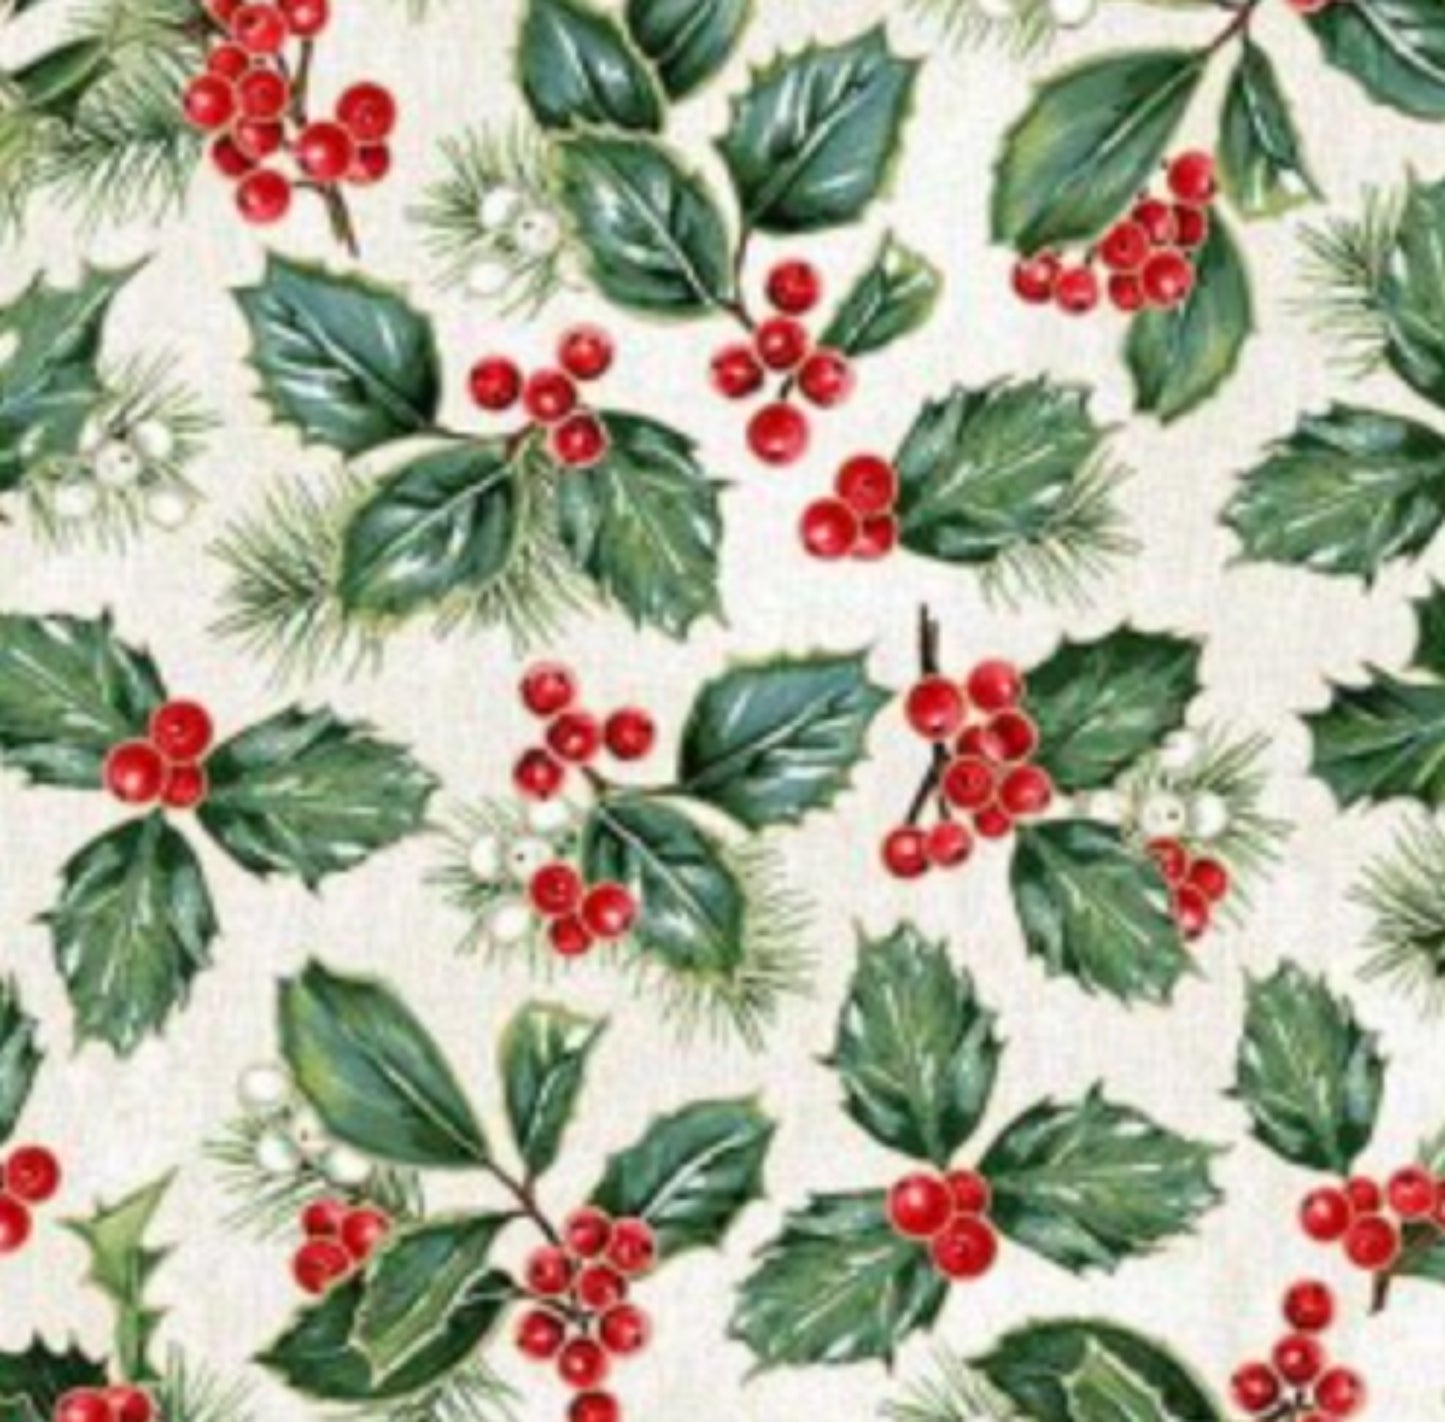 Christmas holly Berry Fabric from Michael Miller Fabrics